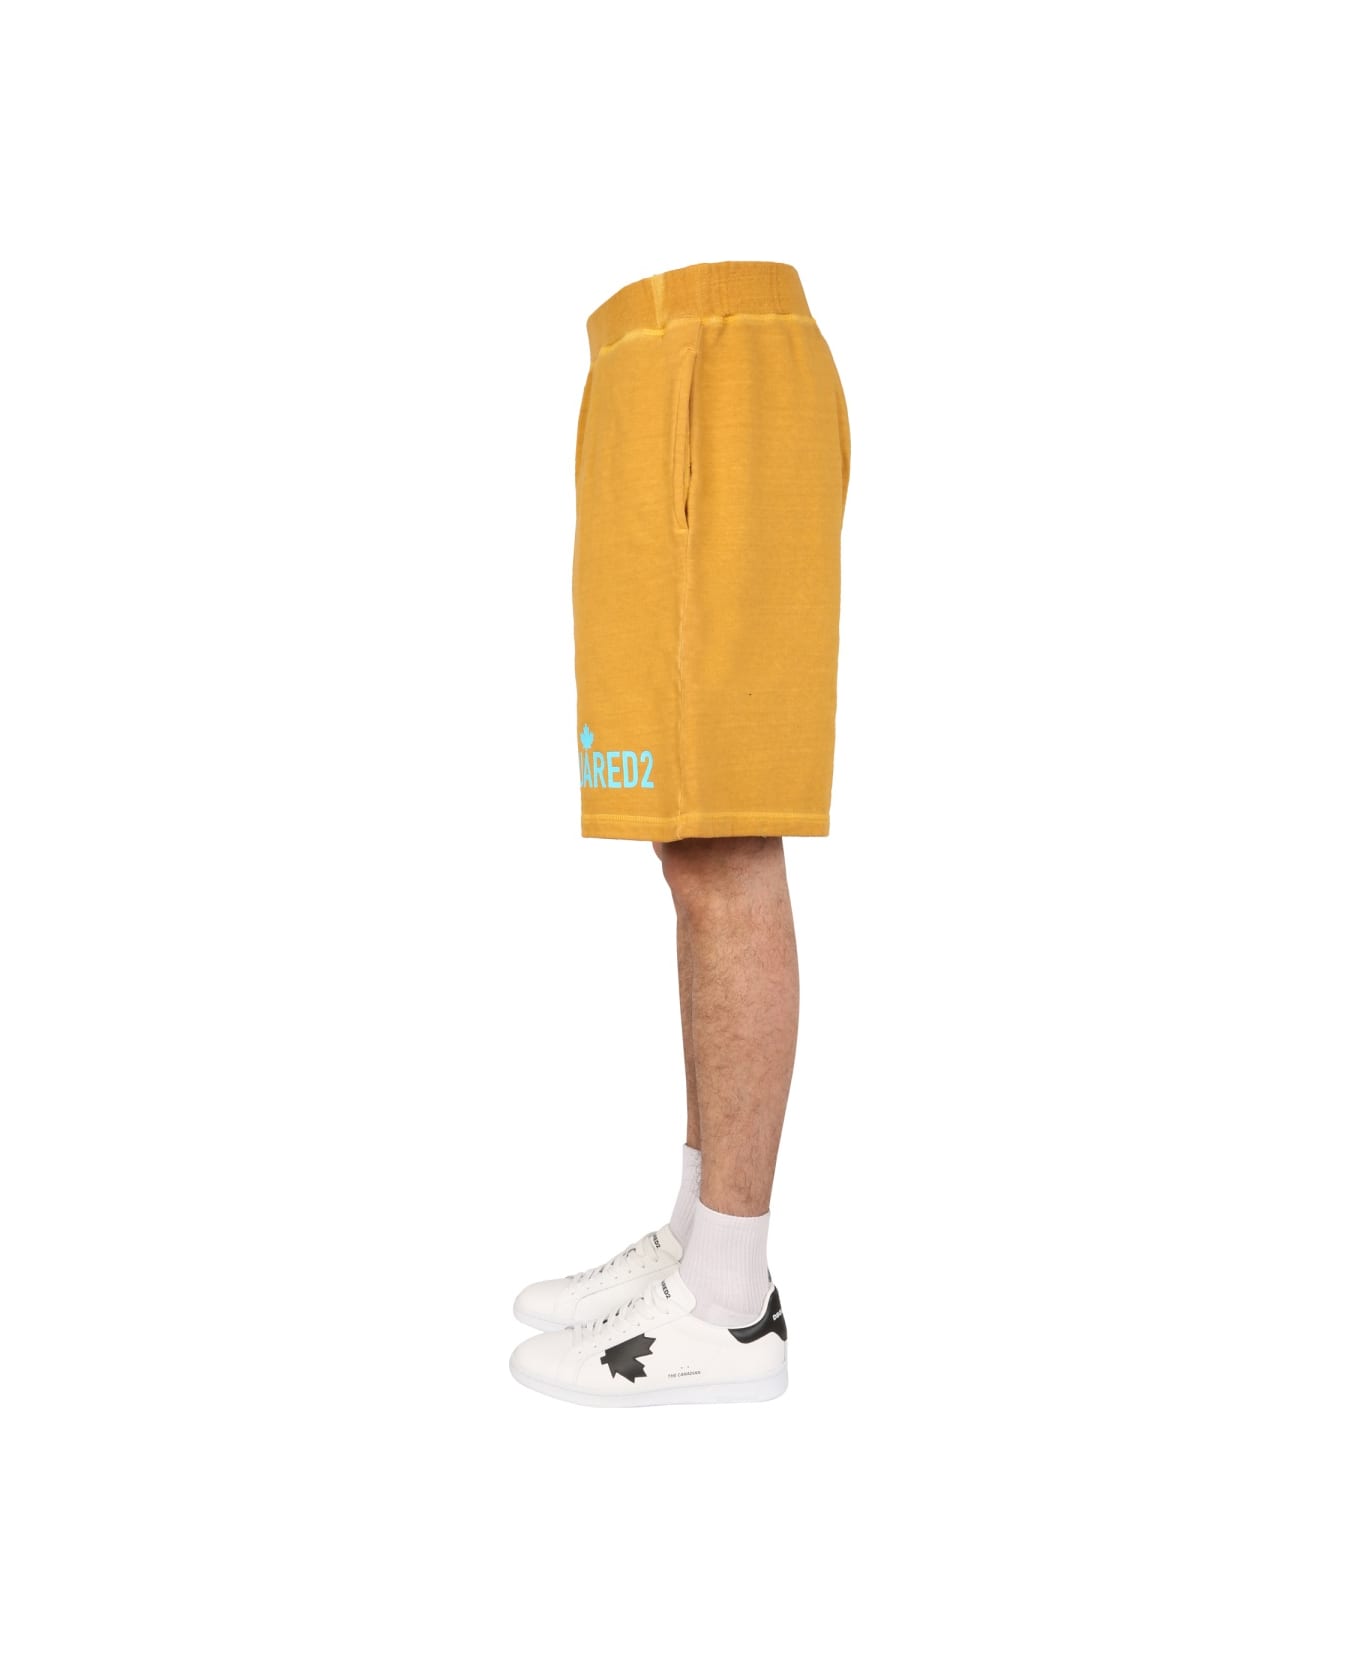 Dsquared2 "one Life One Planet" Bermuda Shorts - YELLOW